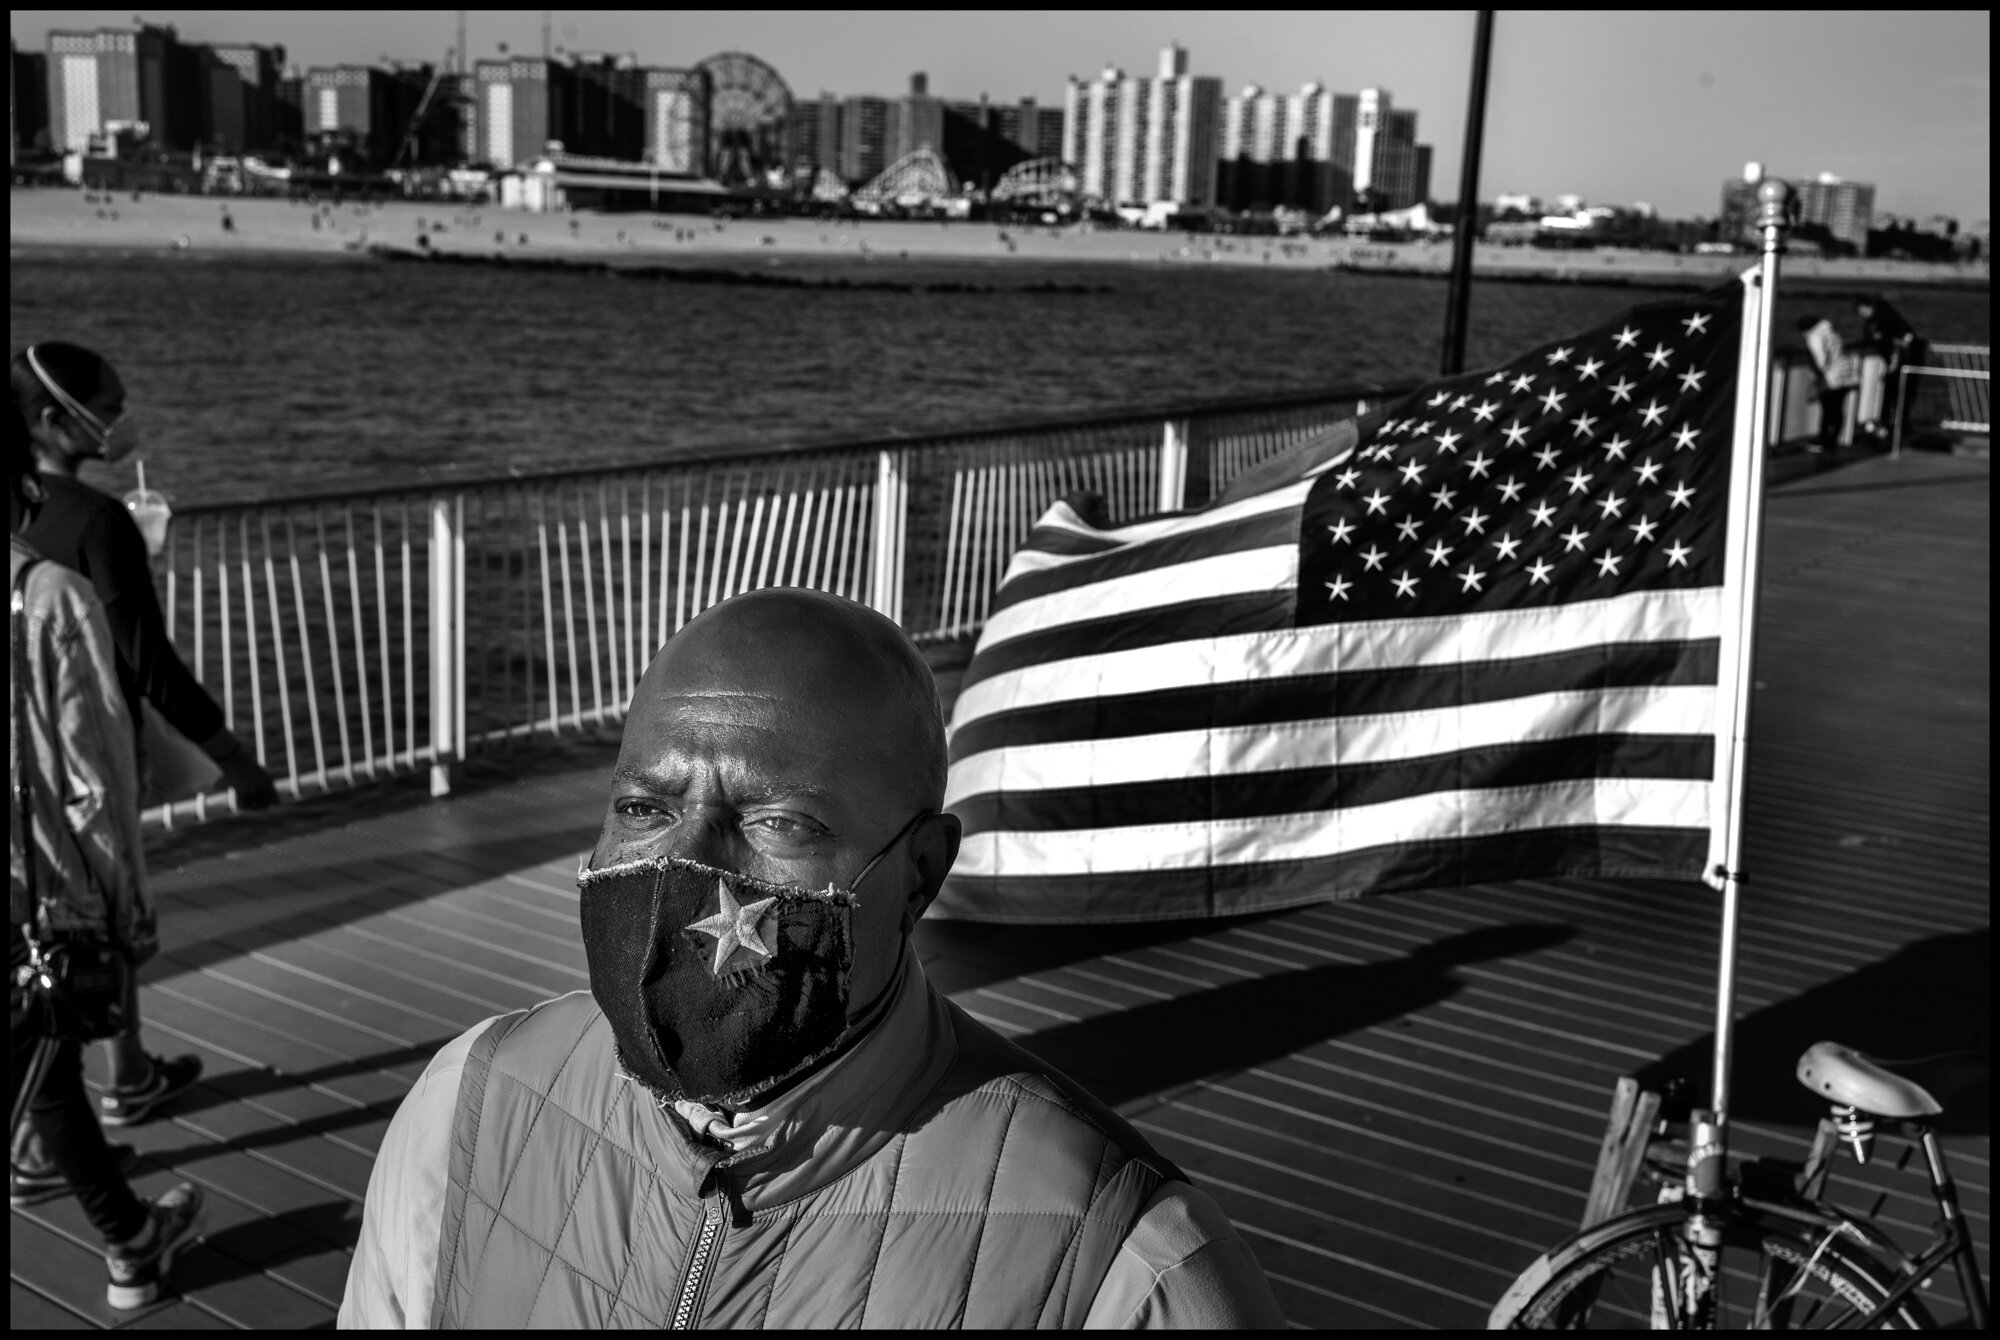  Johnathan, from Brooklyn, is a veteran and comes every day with a US flag to the pier and stays most days all day, from early morning. “I love this country. We’re in a crisis now-we need some hope. We have to be more careful of each other and we nee